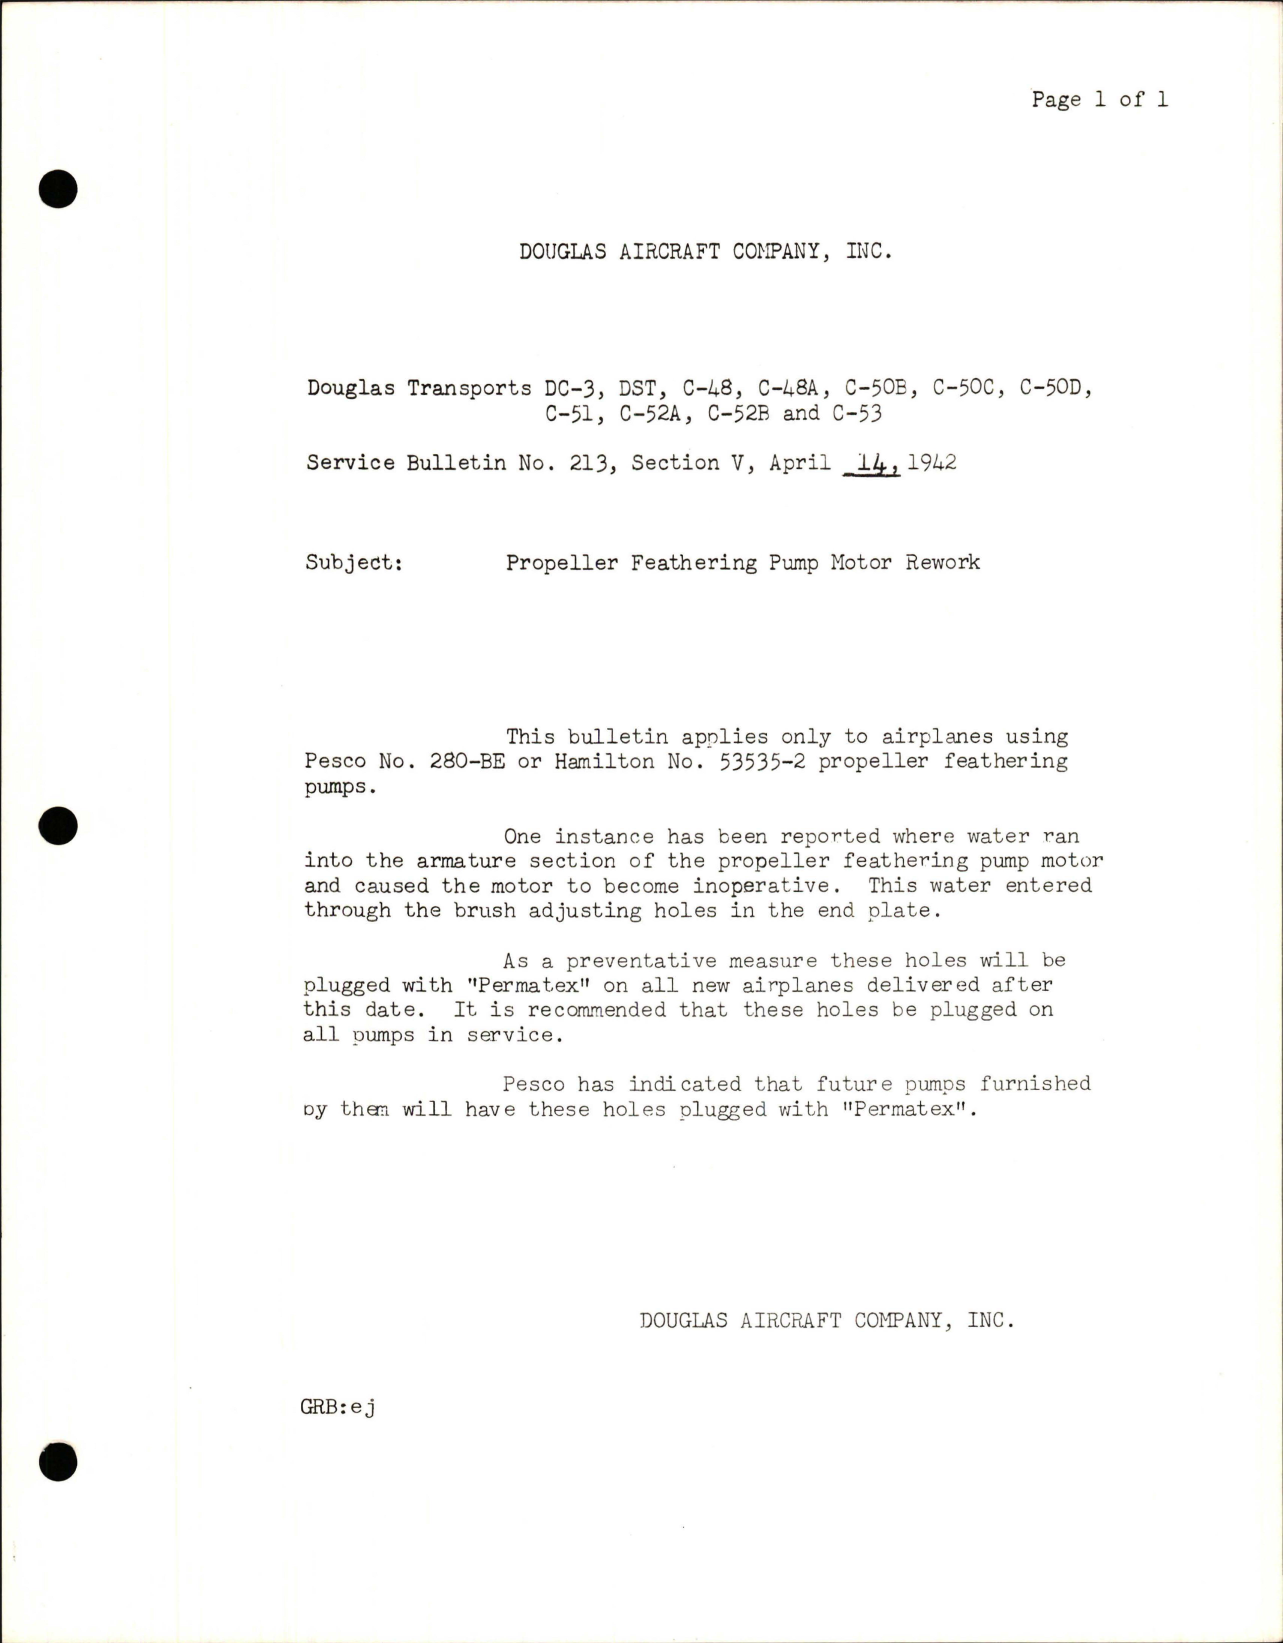 Sample page 1 from AirCorps Library document: Propeller Feathering Pump Motor Rework